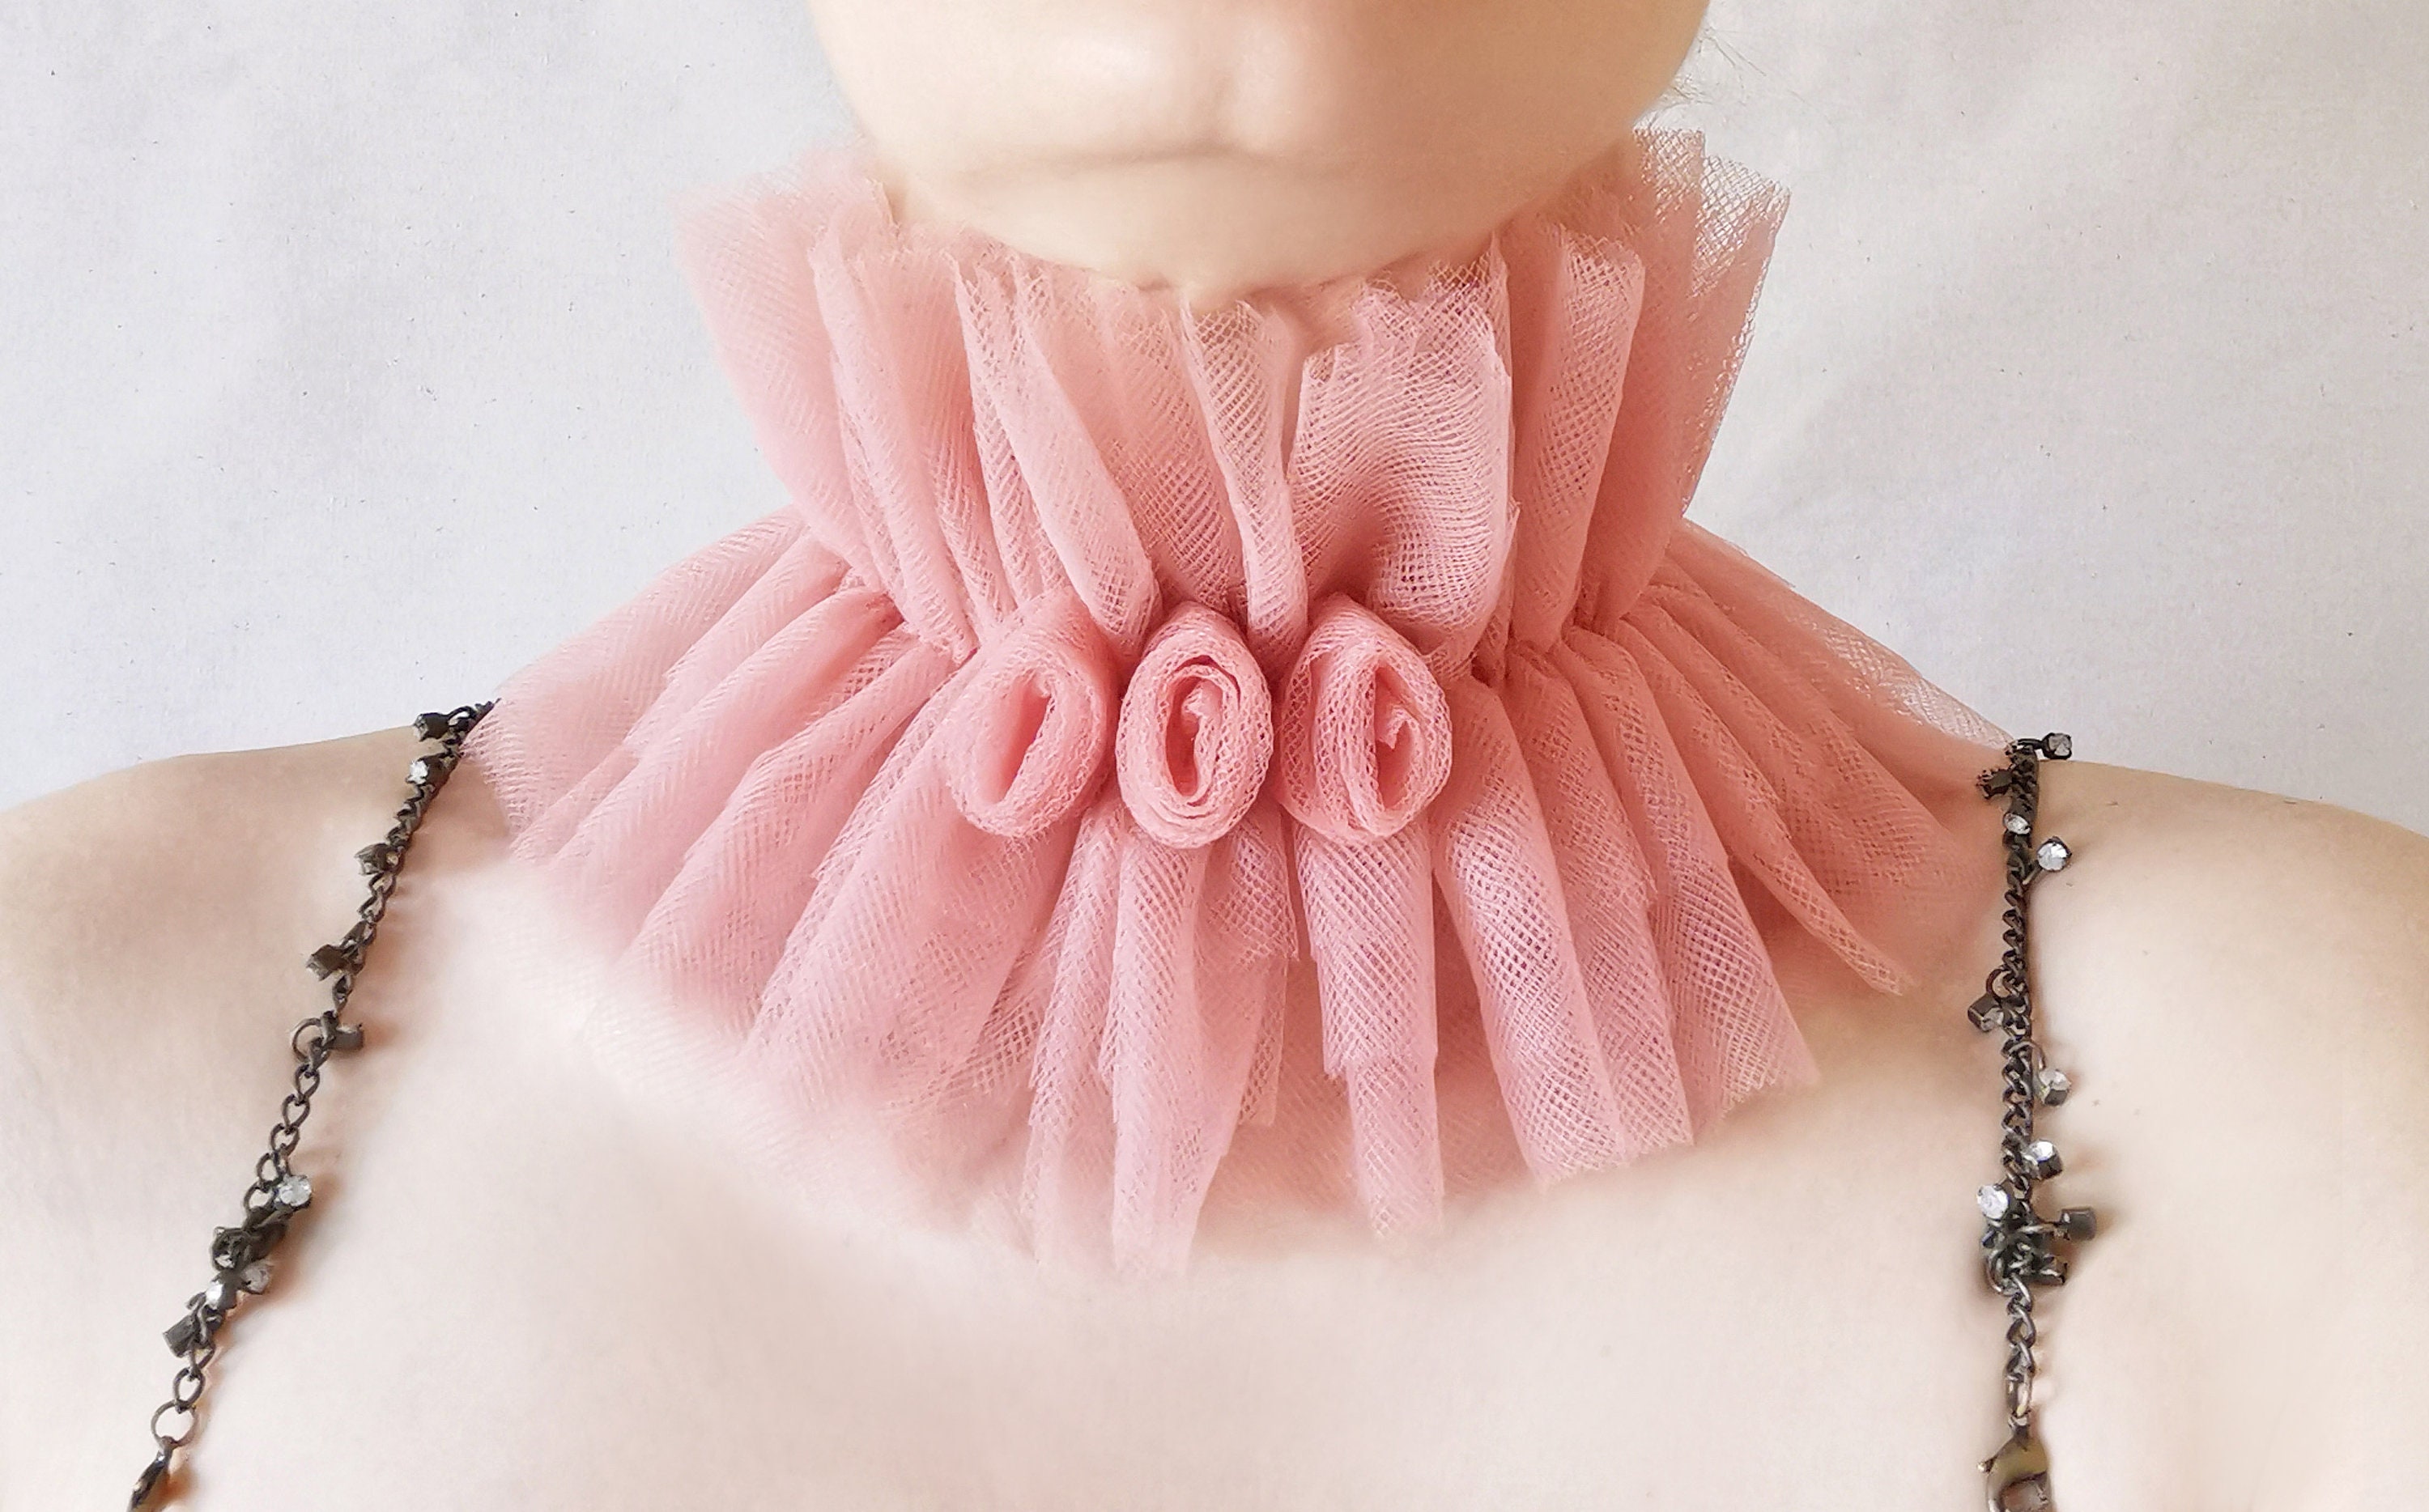 High Neck Collar Pink Tulle Roses Neckpiece Victorian Ruff Collar  Bridesmaid Gown Accessory Wedding Bride Collar Photoshoot Stage Costume 